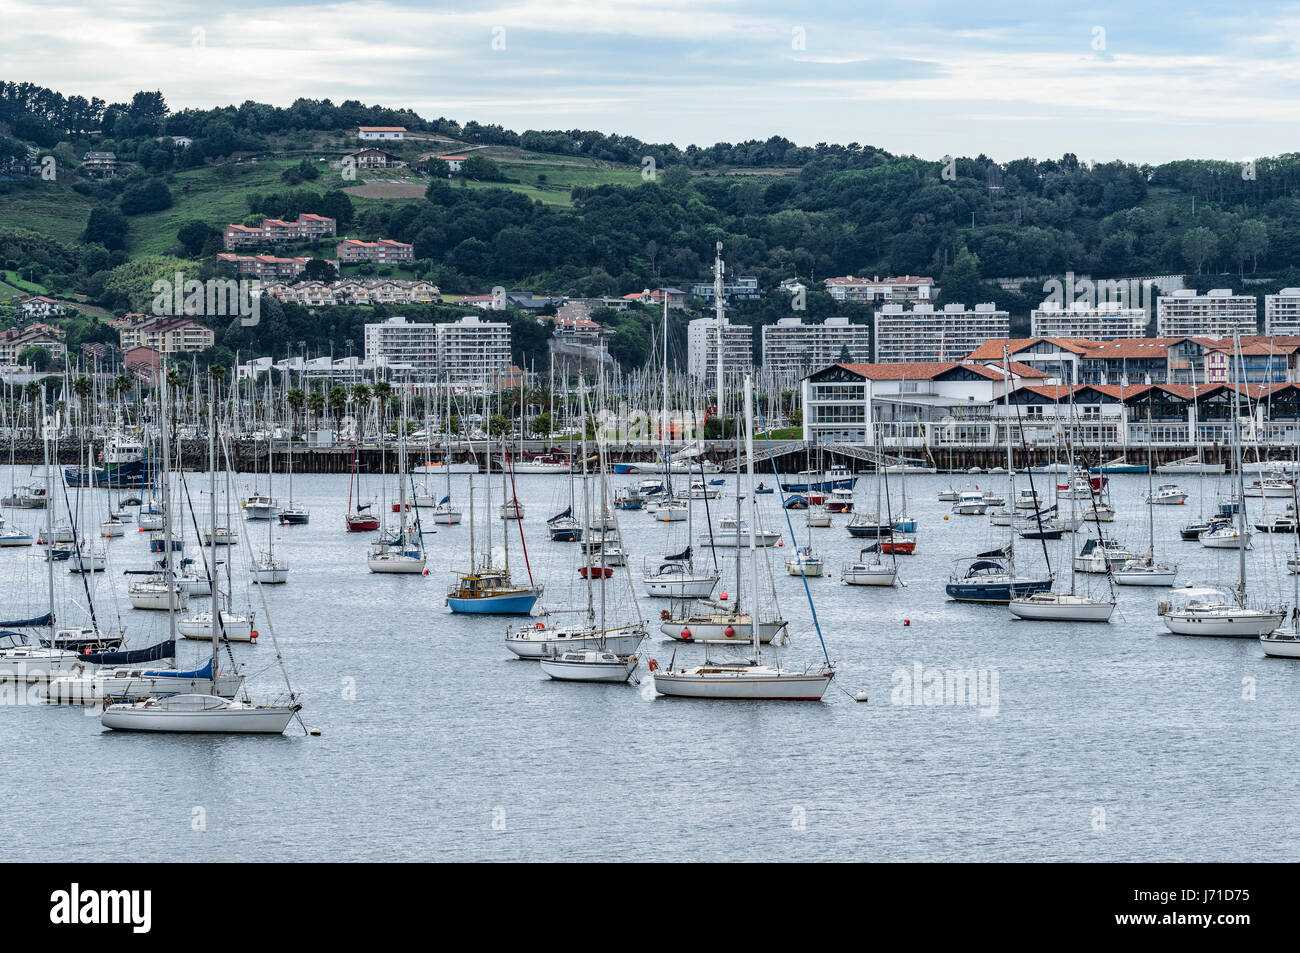 Day cloudy at Bay of Txingudi. Hondarribia, Basque Country, España, viewed from the city of Hendaye, France, in the estuary of the river Bidasoa, Euro Stock Photo